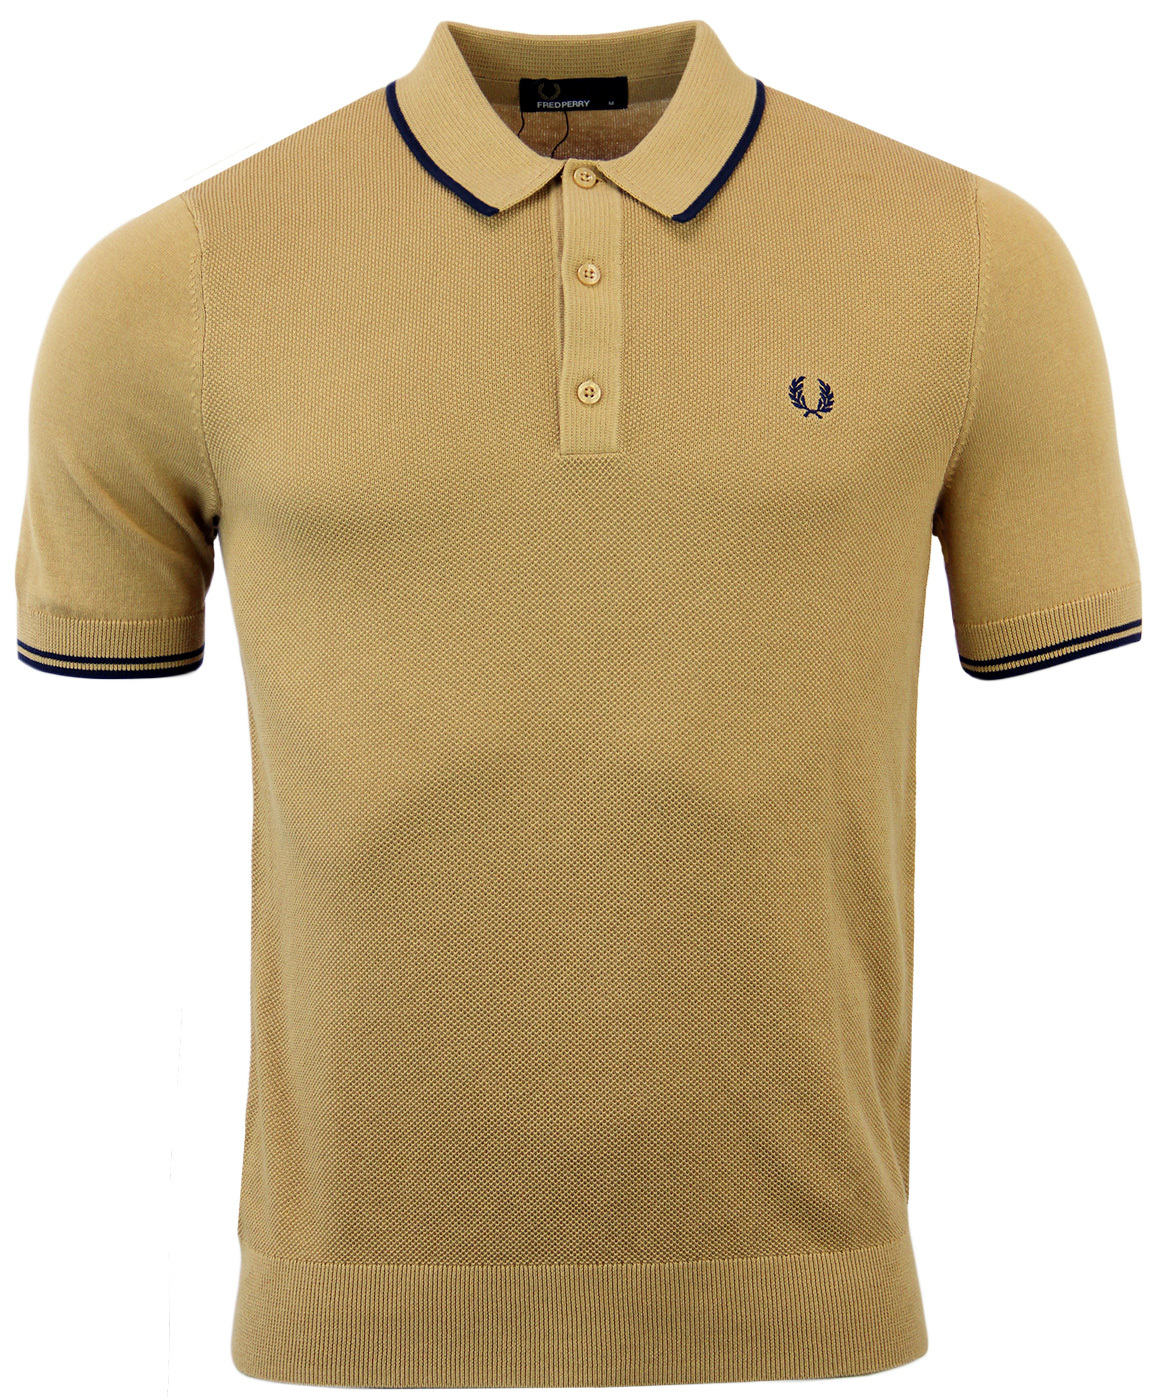 FRED PERRY Tipped Textured Knitted Polo Shirt C